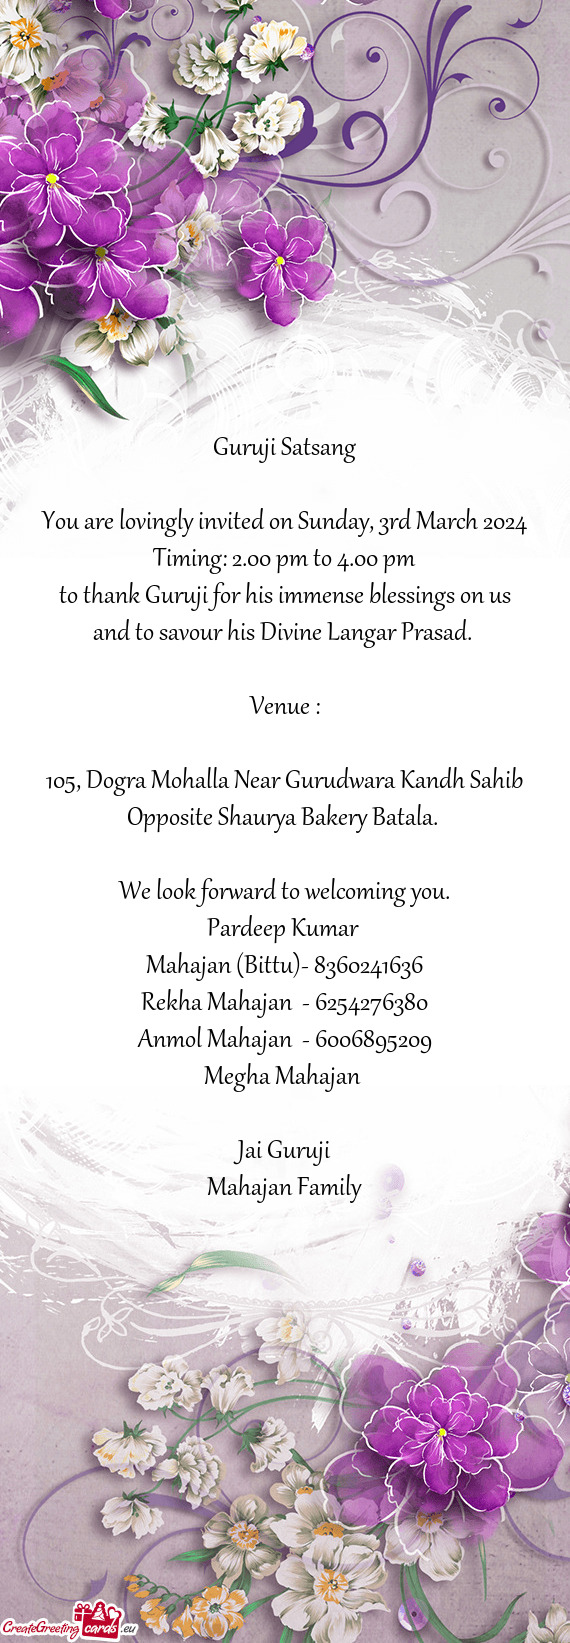 You are lovingly invited on Sunday, 3rd March 2024